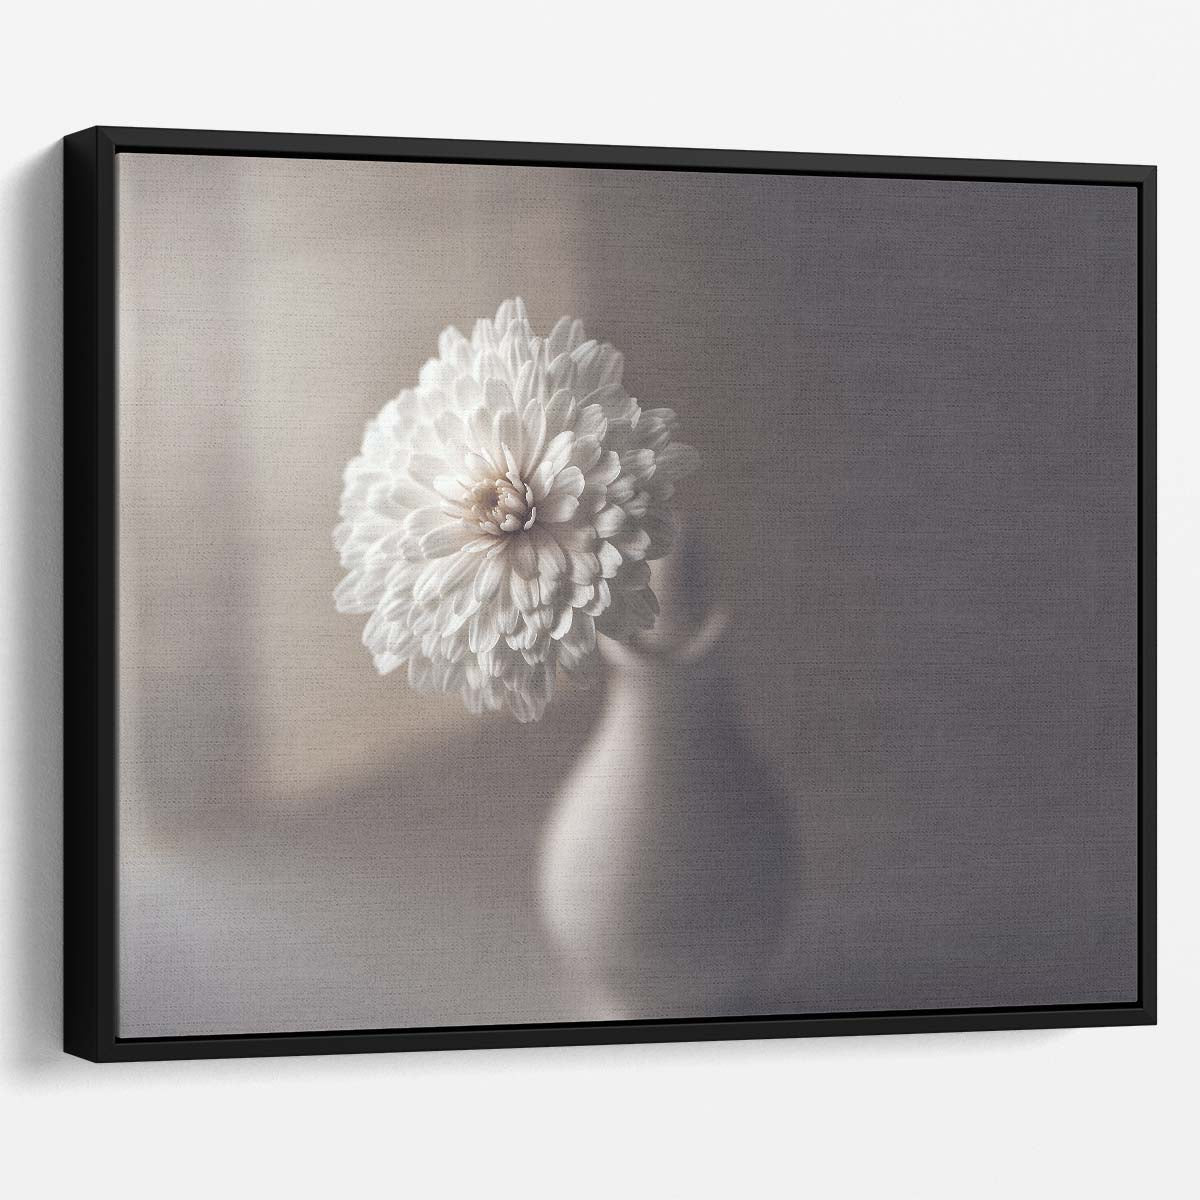 White Chrysanthemum Floral Vase Wall Art by Luxuriance Designs. Made in USA.